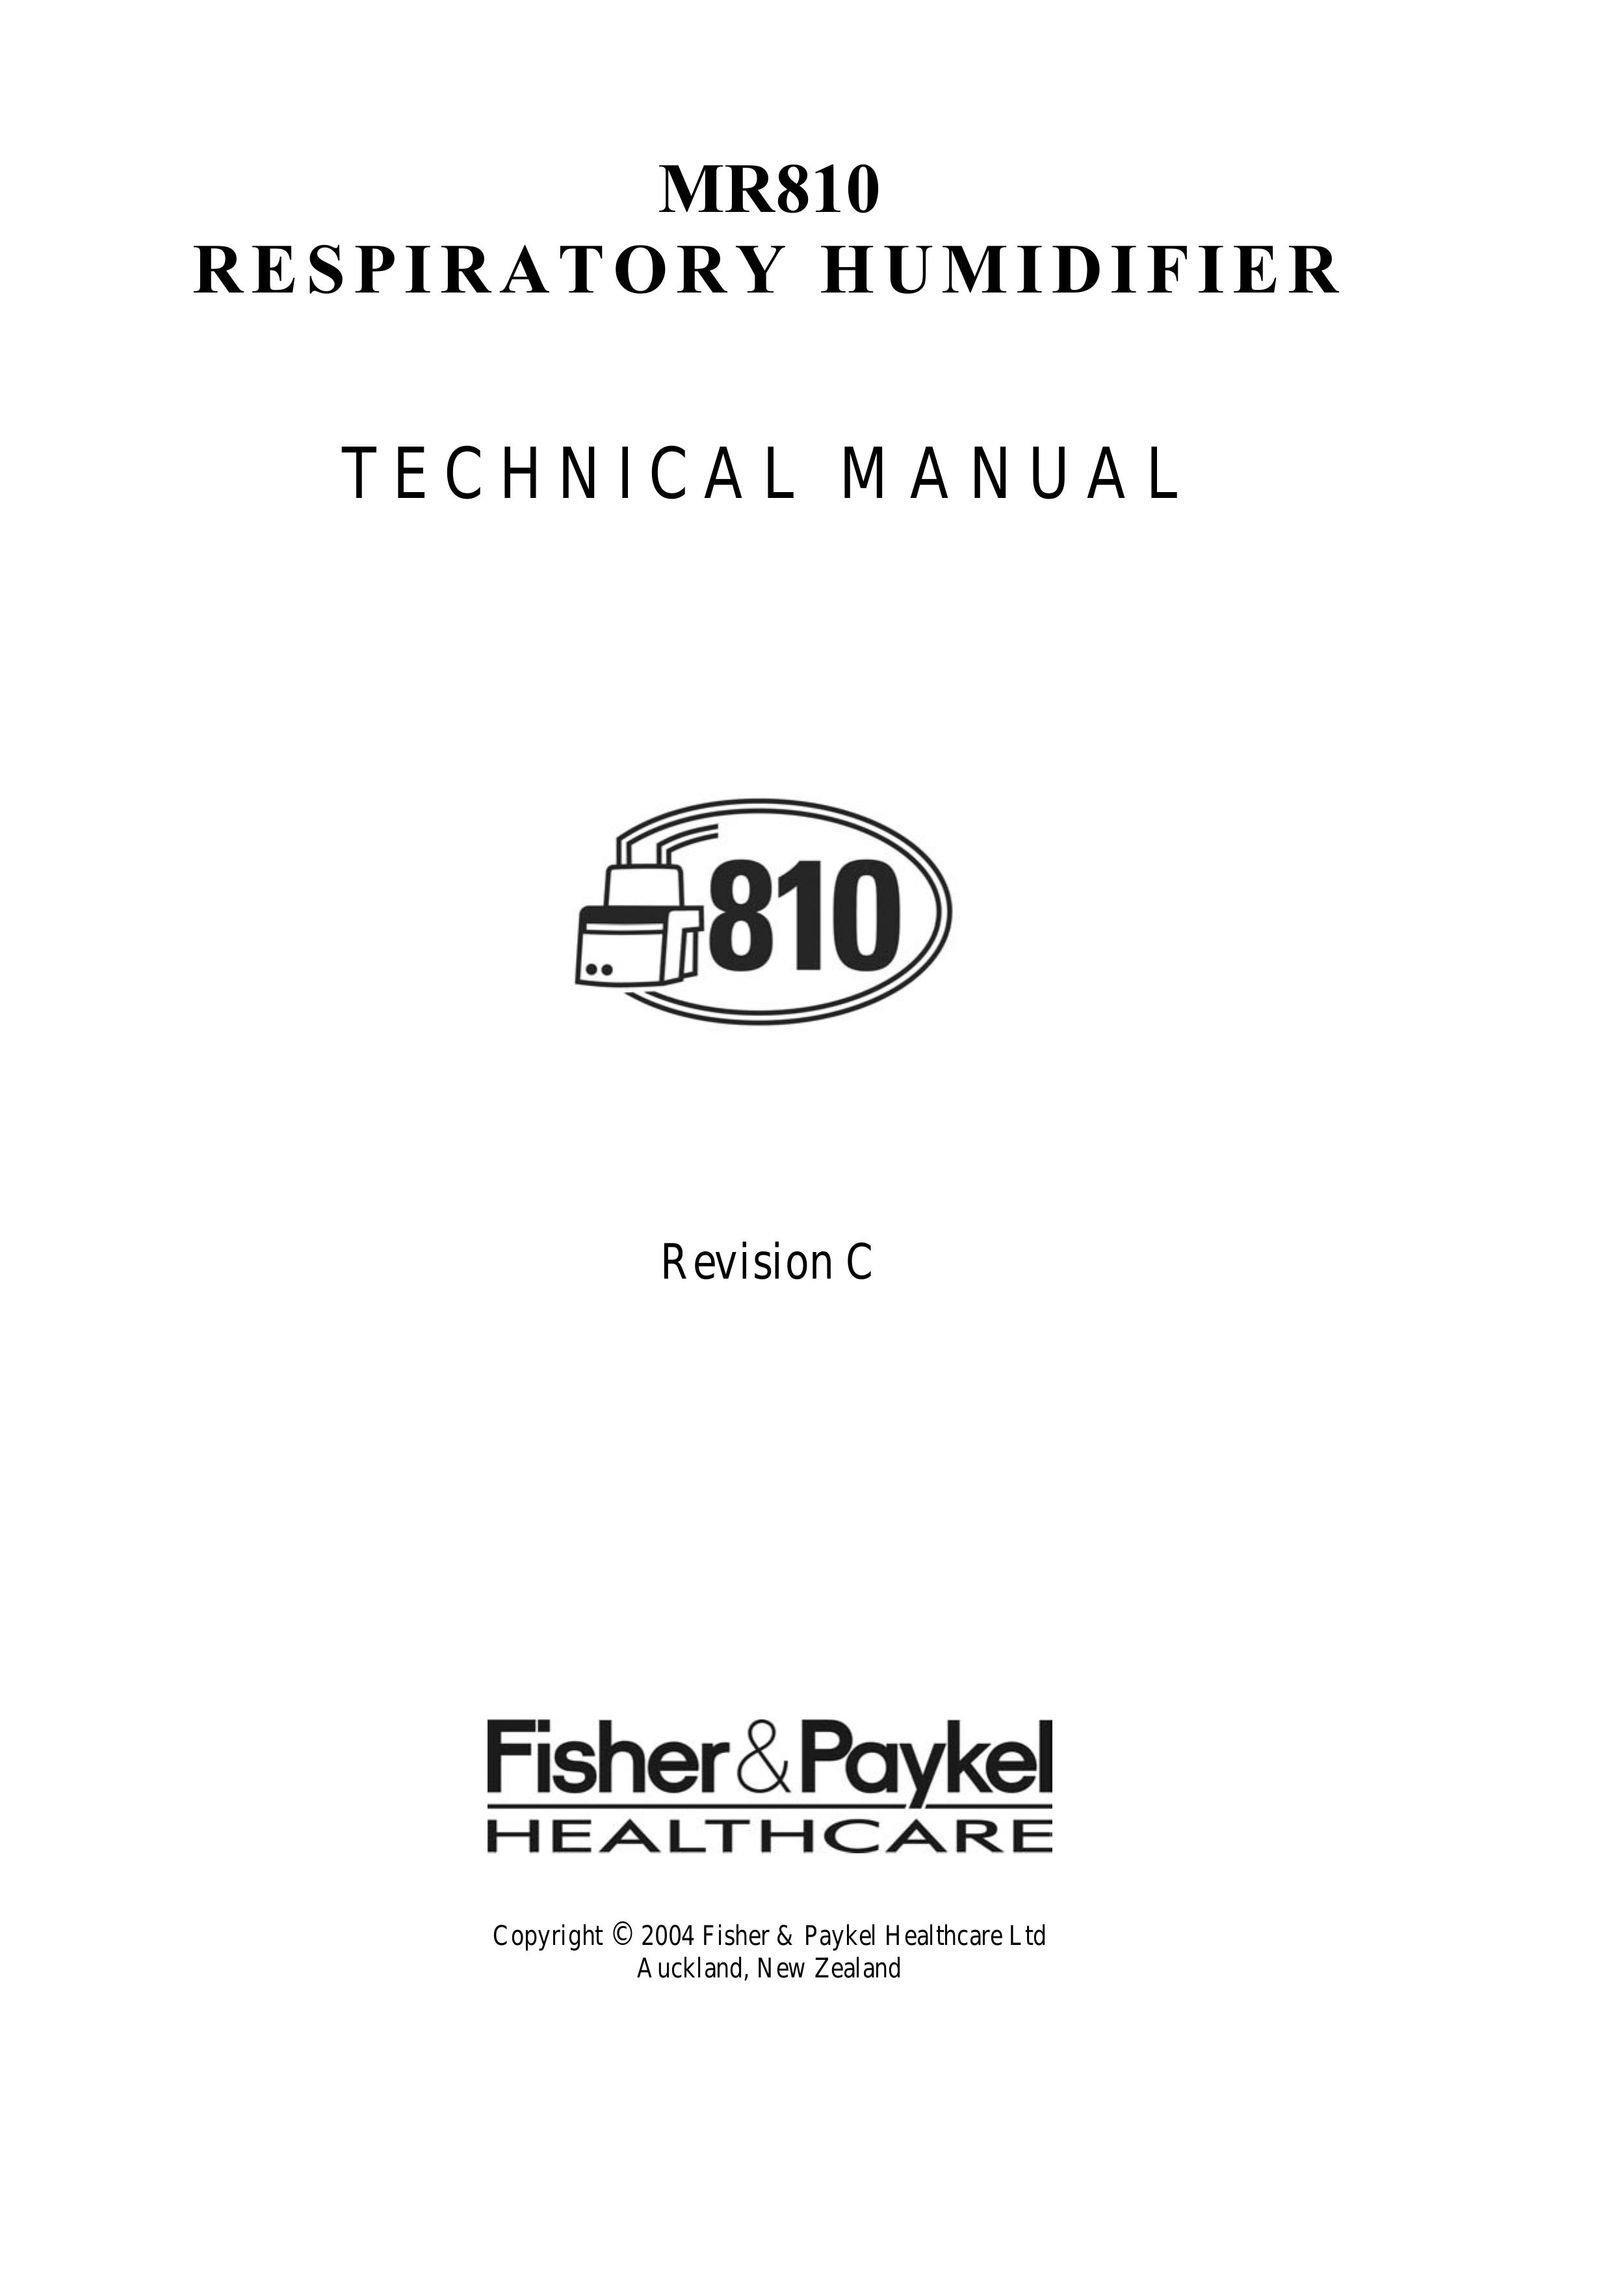 Fisher & Paykel MR810 Humidifier User Manual